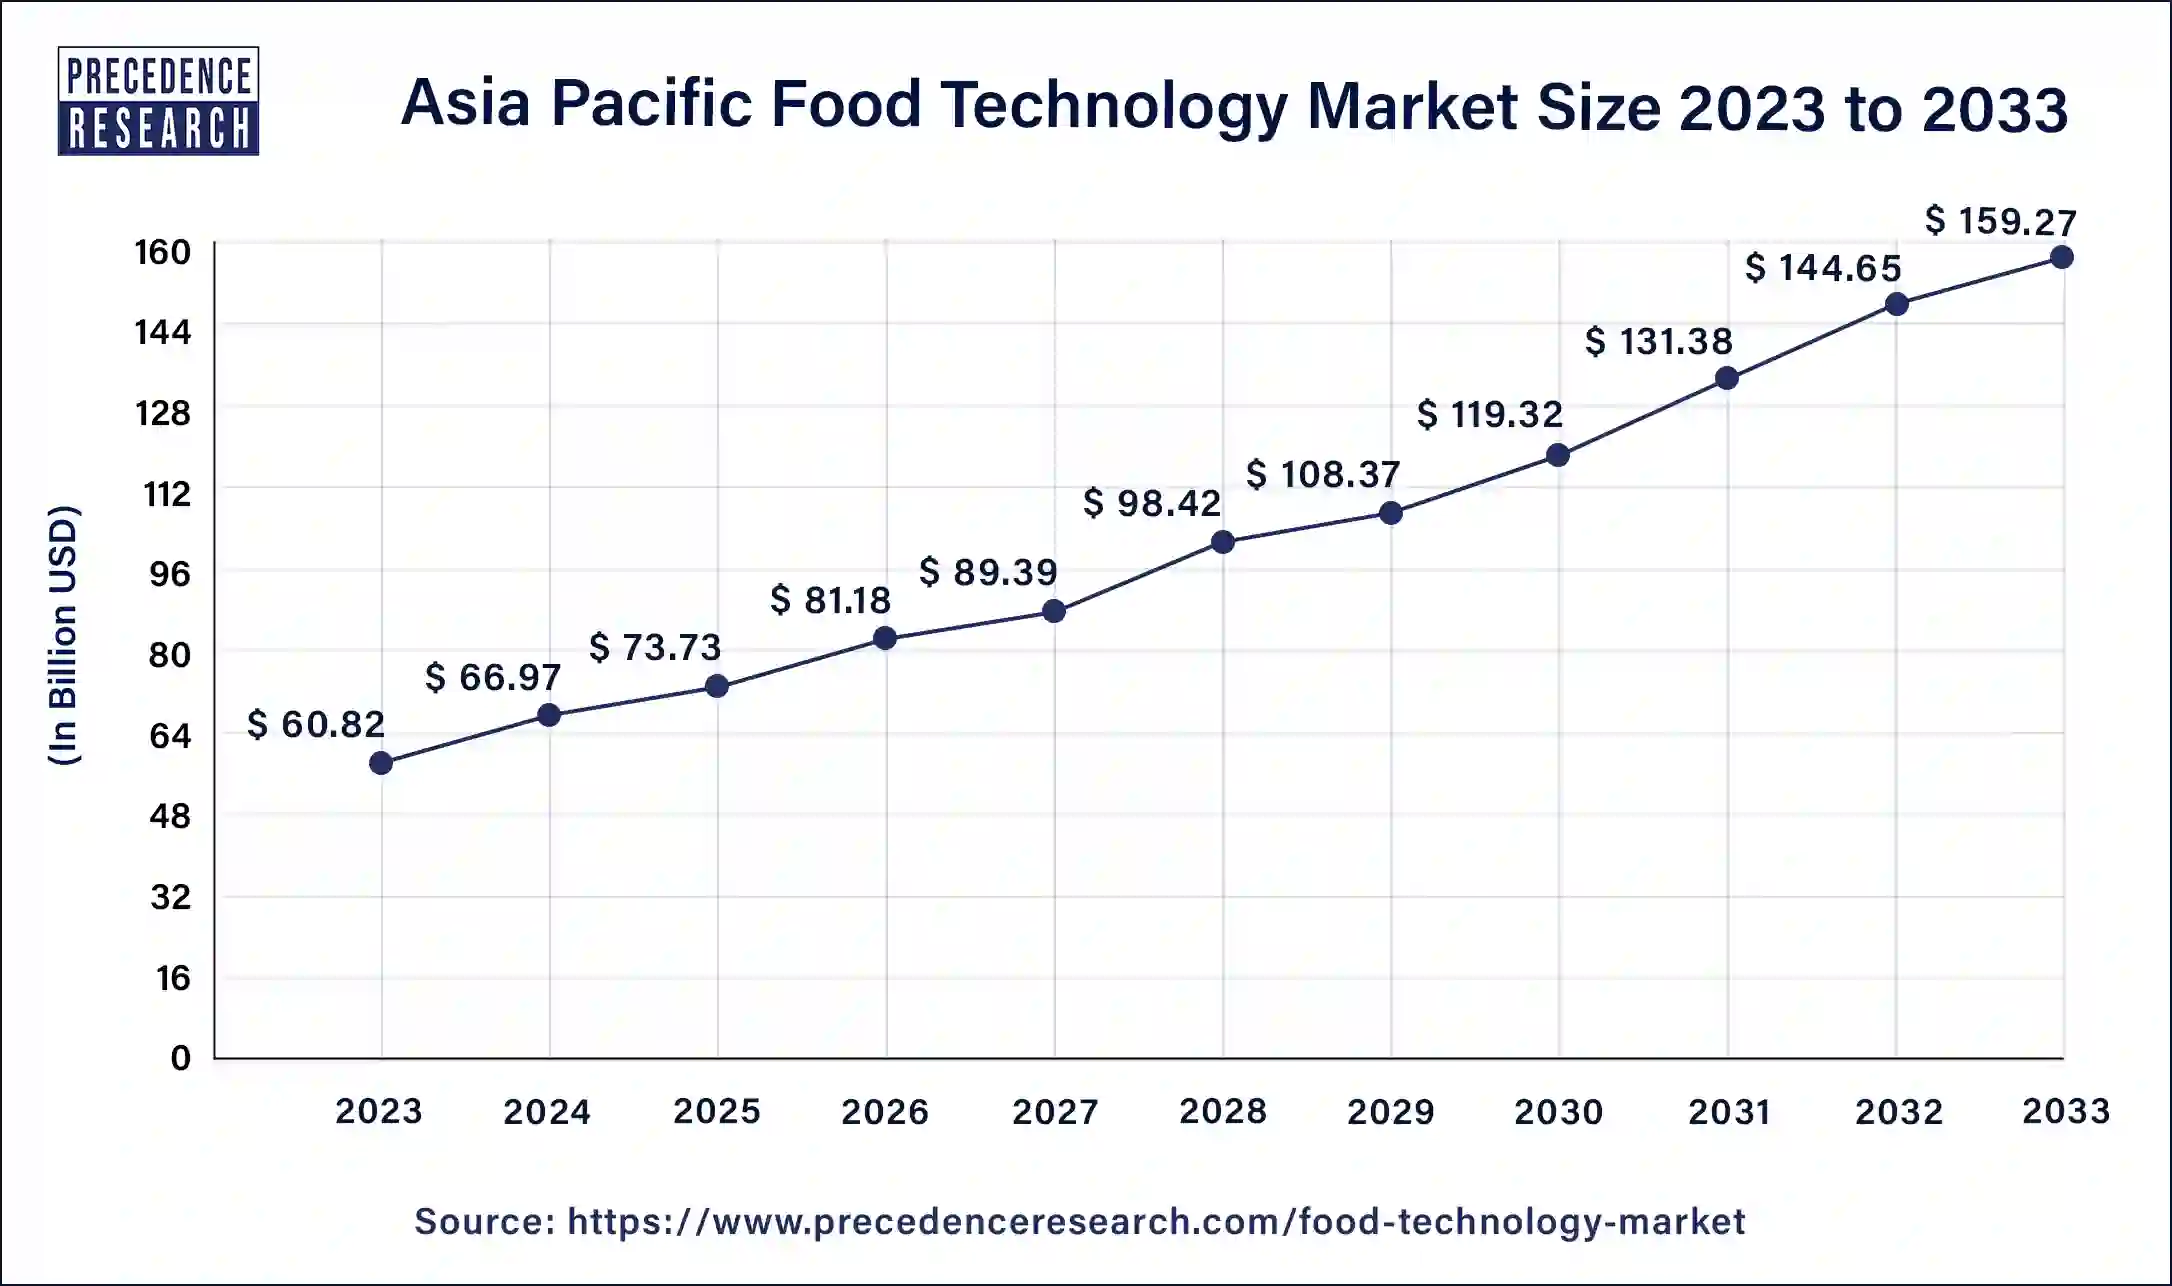 Asia Pacific Food Technology Market Size 2024 to 2033